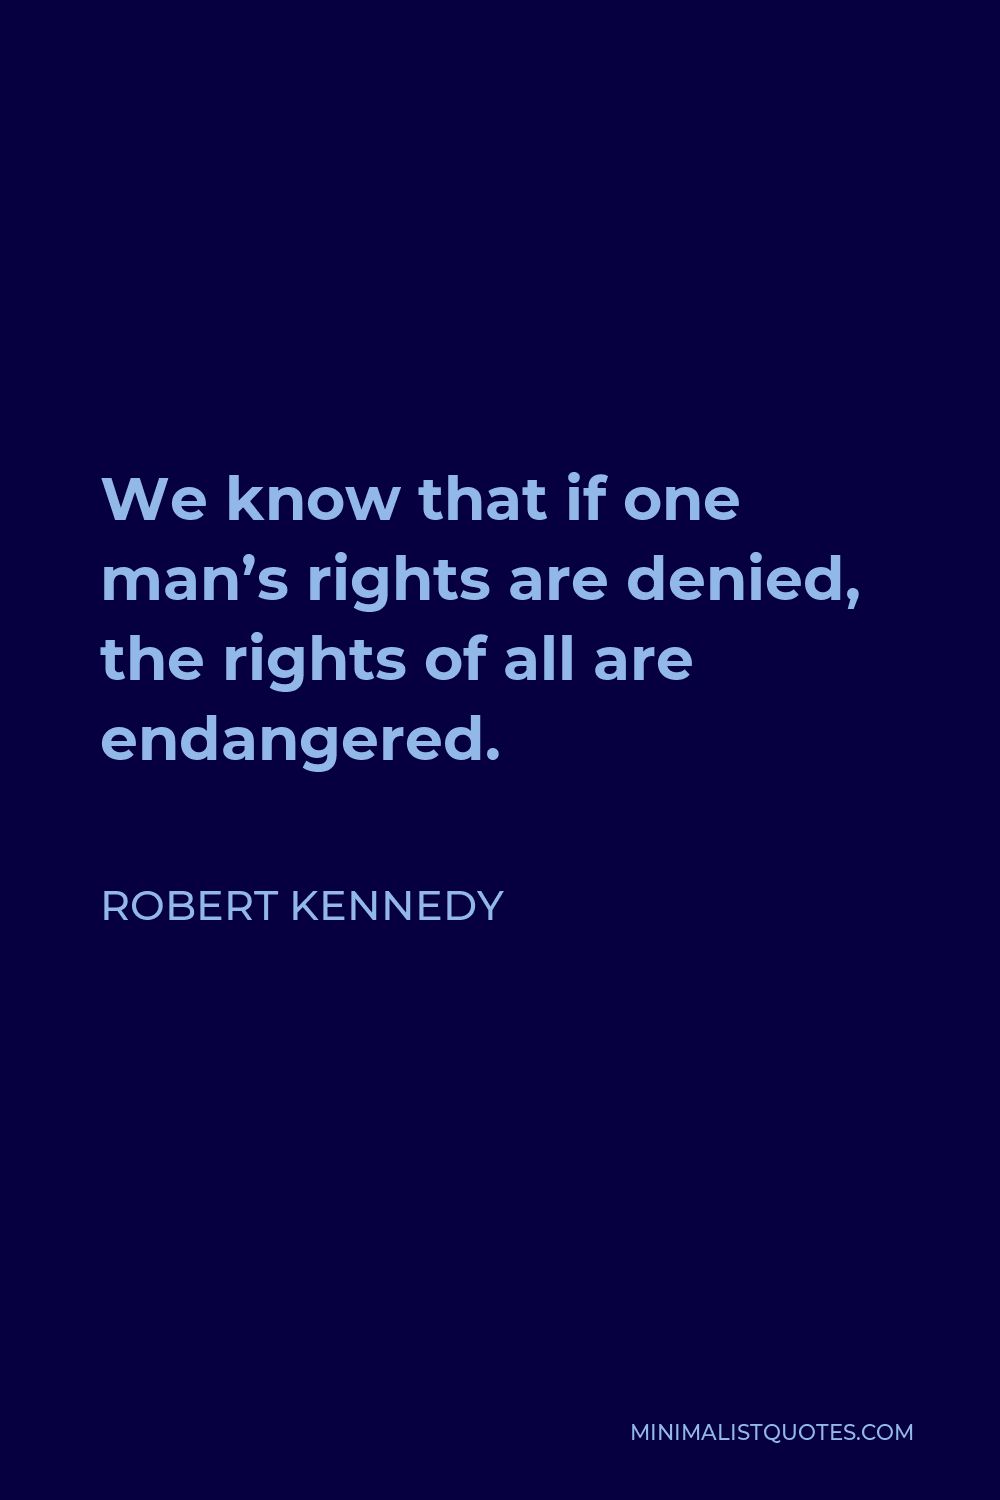 Robert Kennedy Quote - We know that if one man’s rights are denied, the rights of all are endangered.